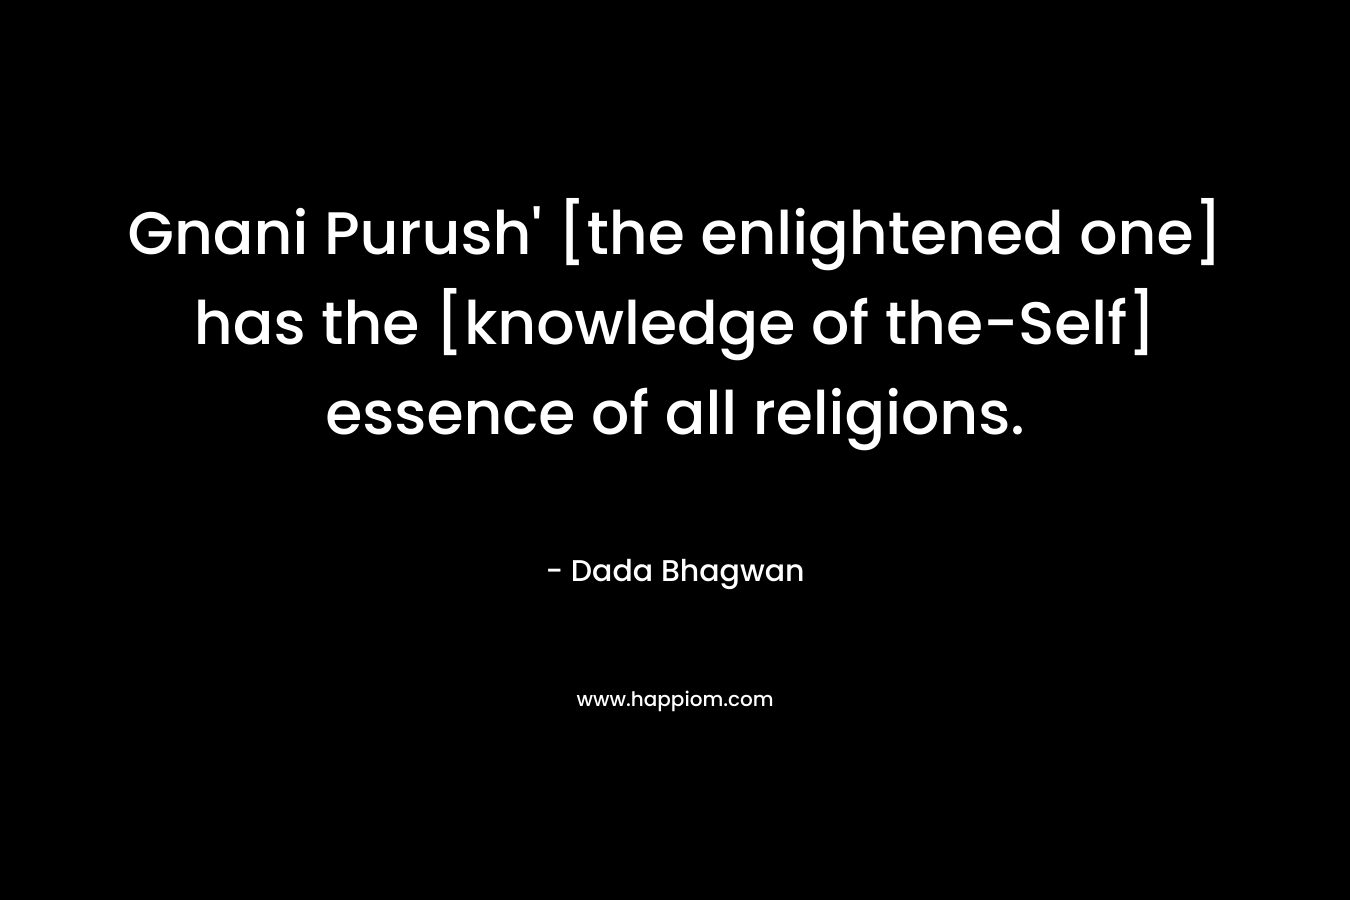 Gnani Purush' [the enlightened one] has the [knowledge of the-Self] essence of all religions.